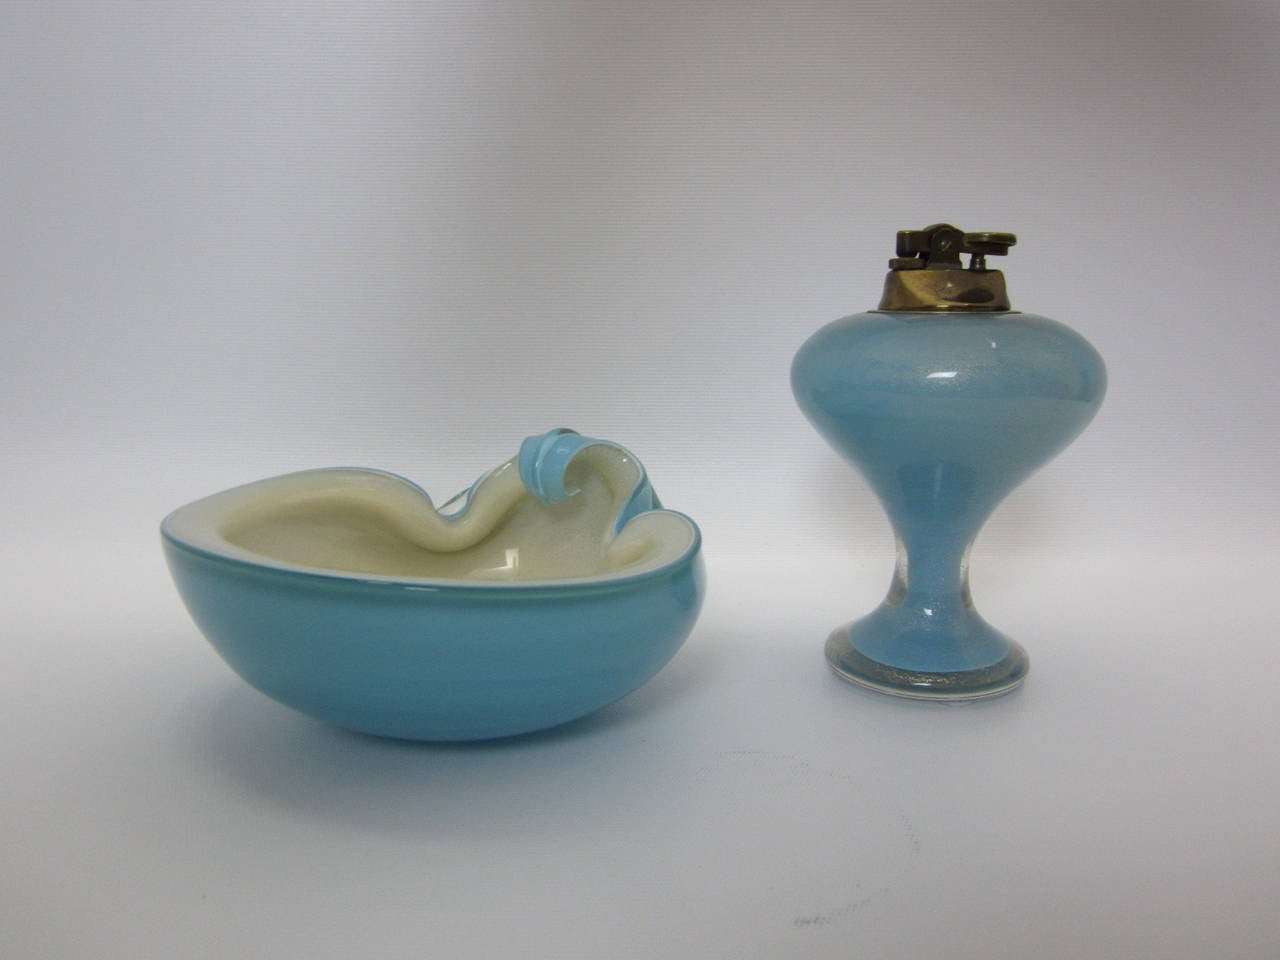 1950s Murano glass smoke set consisting of a Venetian-blue flip-top dish with off white interior filled with gold flecking and a rare matching mushroom shaped tabletop lighter. Designed and manufactured by Alfredo Barbini both documented in a 1950s